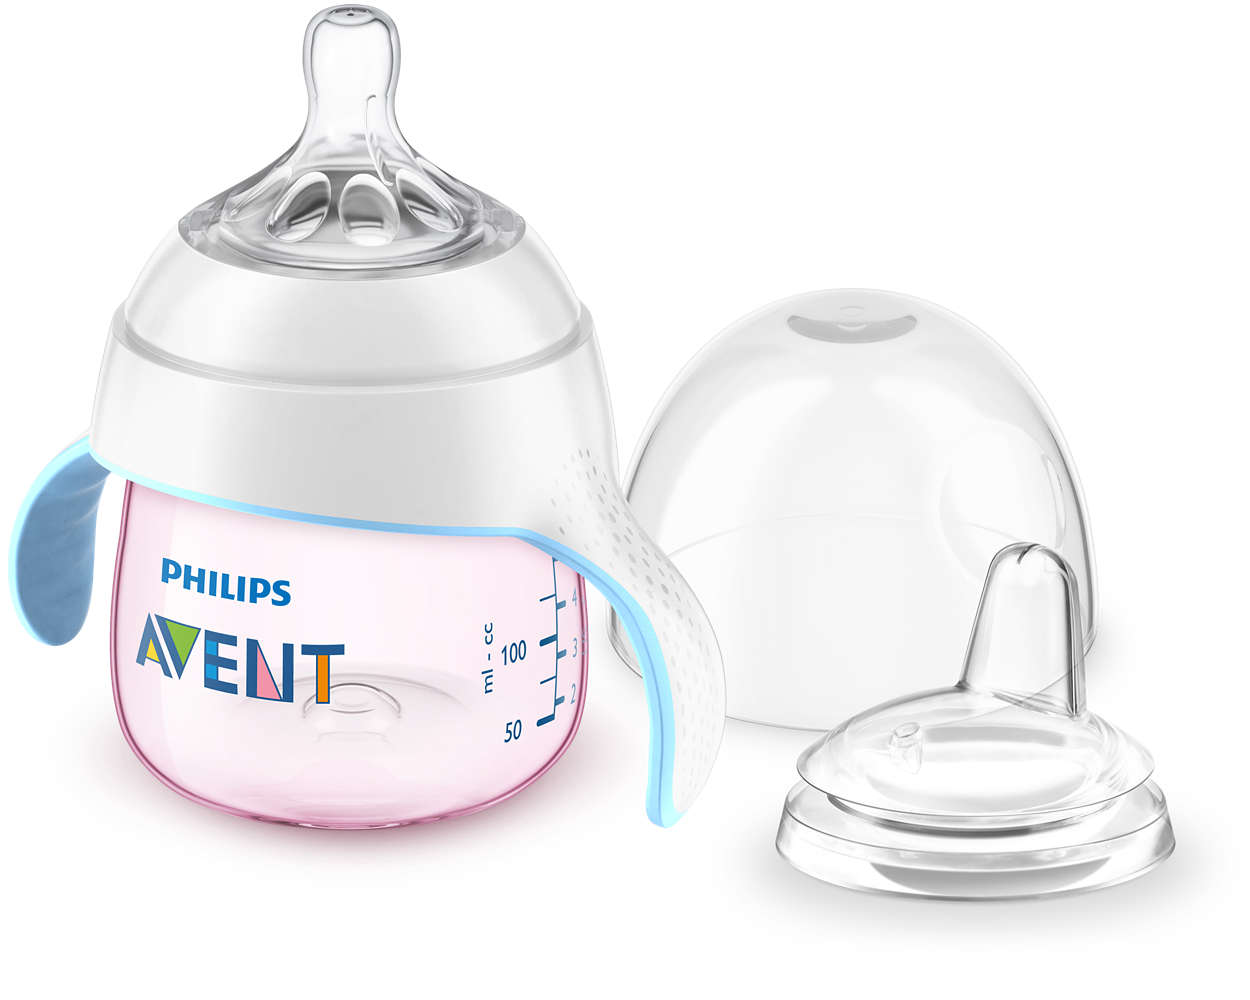 Ease your baby's transition to a drinking cup